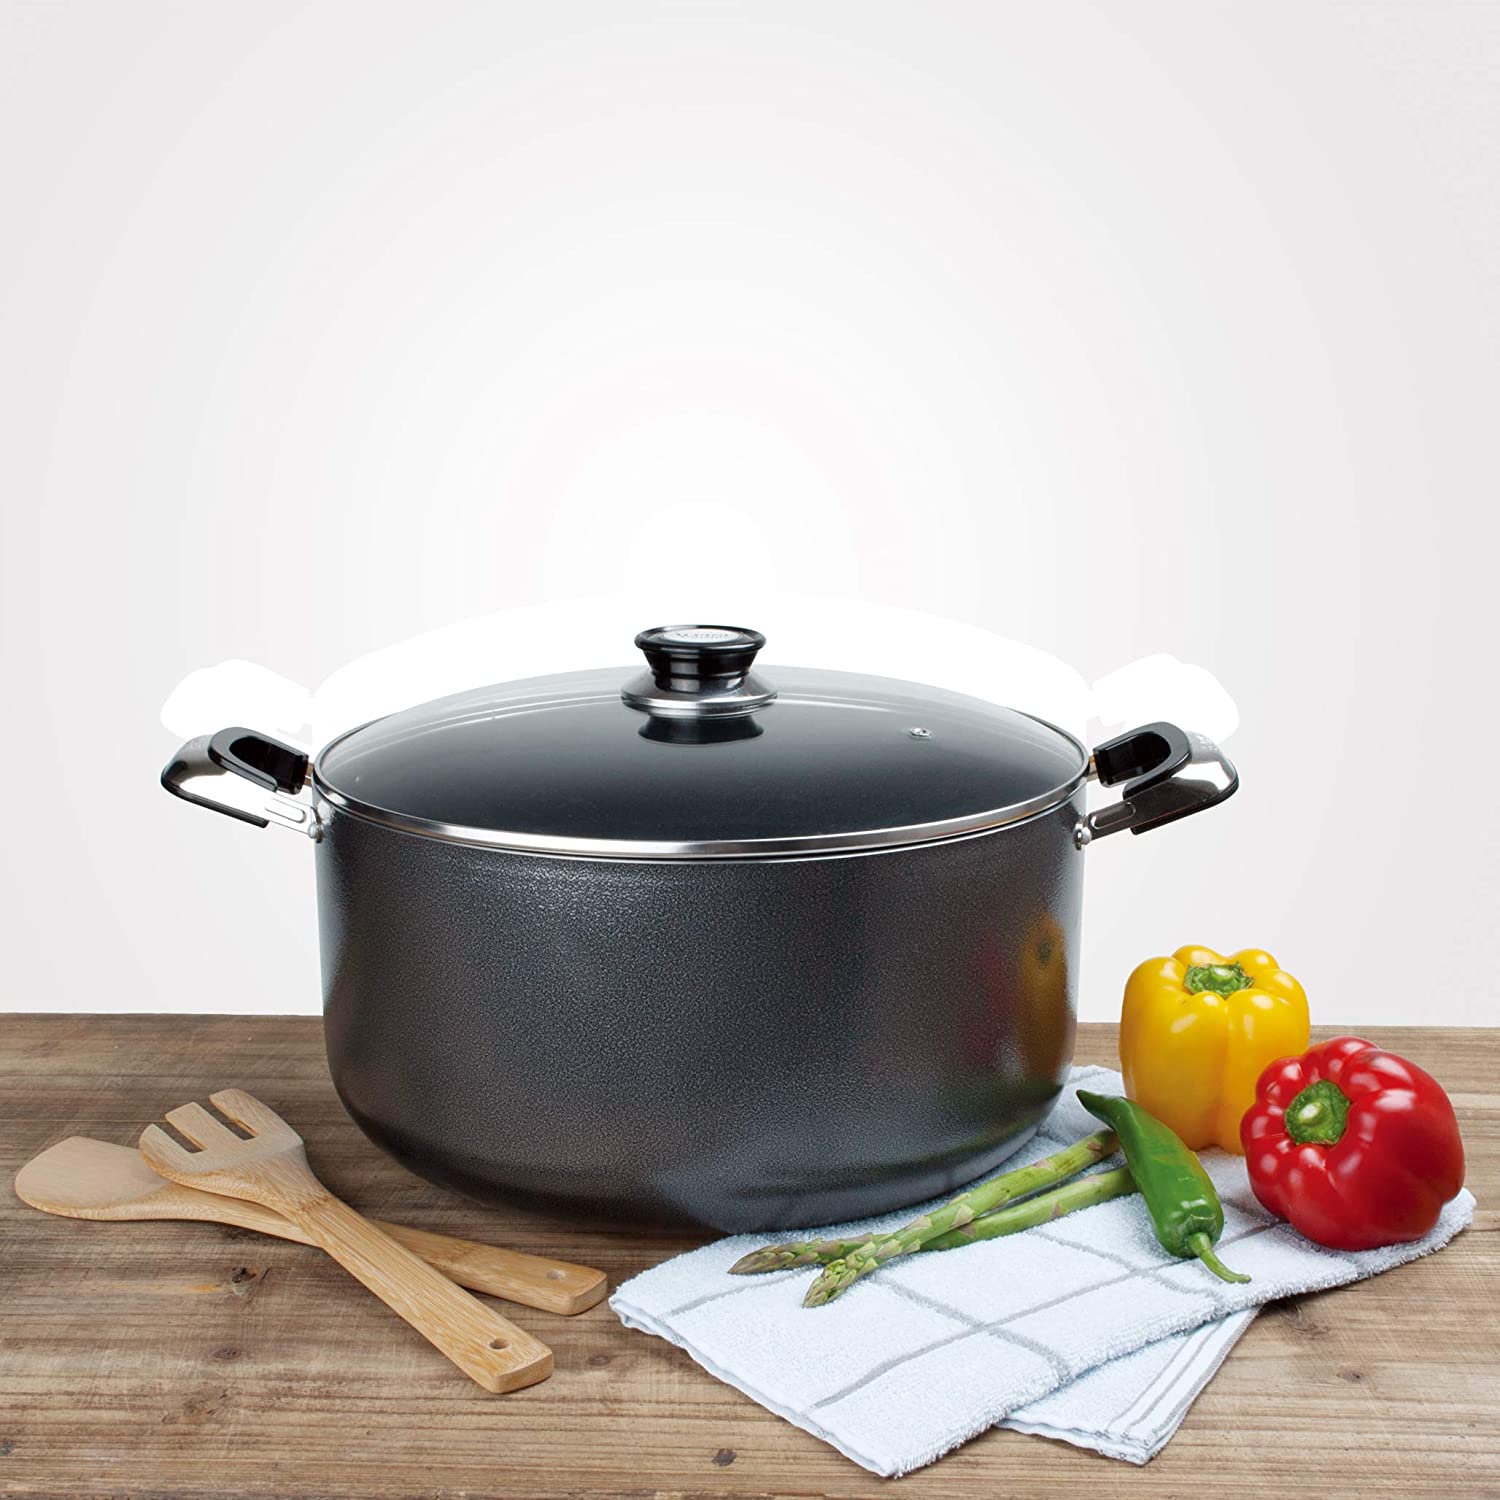 Alpine Cuisine 2 Quart Stainless Steel Dutch Oven Pot with Glass